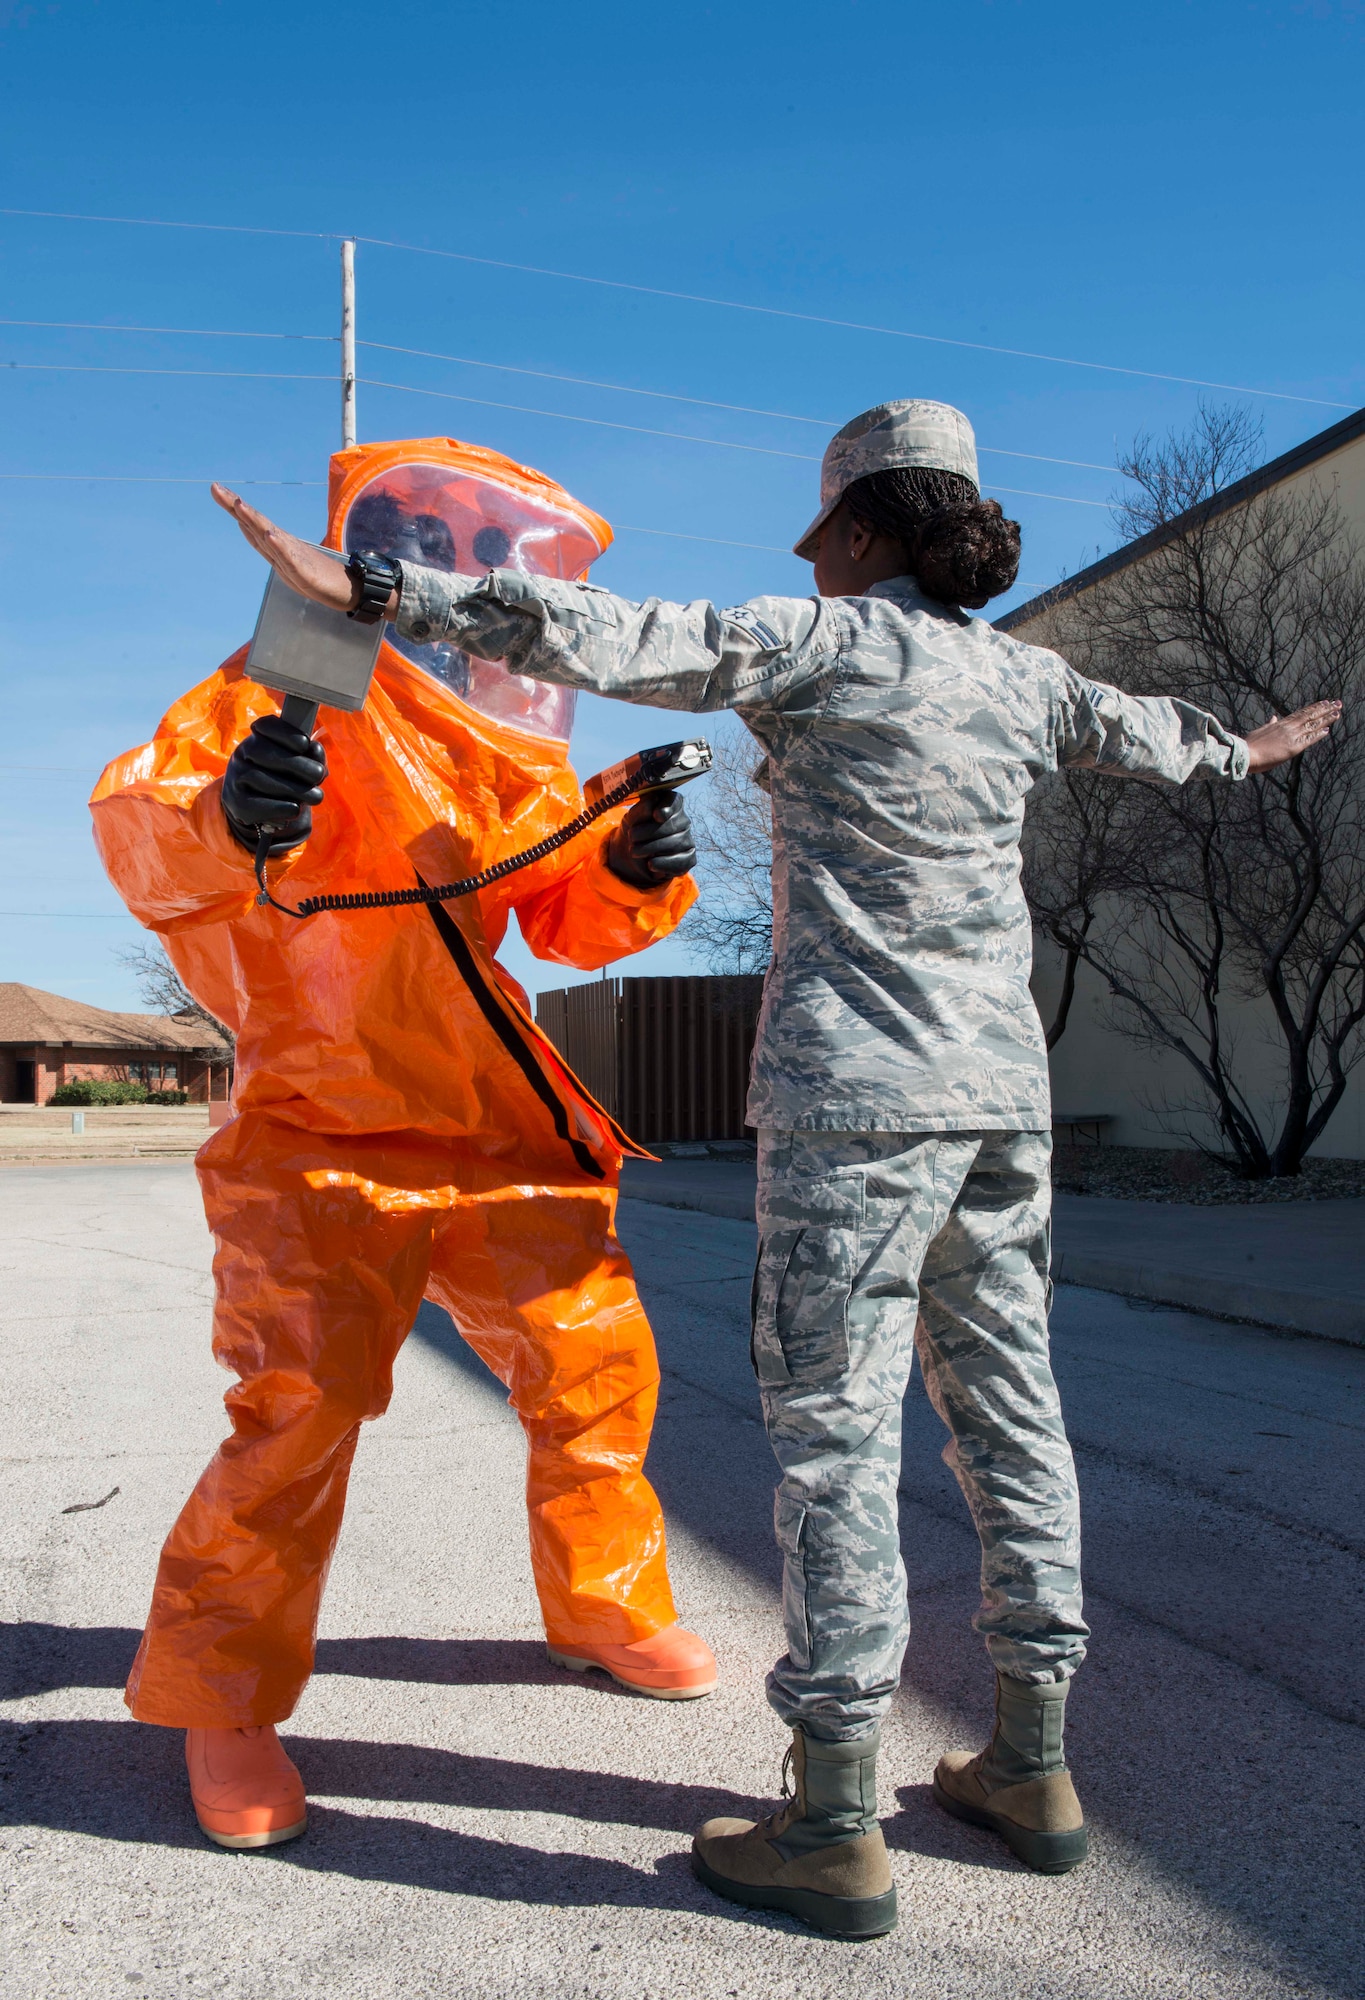 U.S. Air Force 1st Lt. Zachary Spranger, 7th Civil Engineer Squadron readiness and emergency management flight commander, (left) uses an ADM-300 tool to search for alpha radiation on Airman 1st Class Julia Scholar, 7th CES emergency management logistics, at Dyess Air Force Base, Texas, Feb. 8, 2017. The Dyess Air Force Base readiness and emergency management flight prepares, plans, trains, educates and equips installation personnel to respond to major accidents, natural disasters, weapons of mass destruction, and wartime chemical, biological, radiological and nuclear attacks. They provide technical expertise to commanders during response operations and perform detection, monitoring, warning and reporting in an effort to save lives, minimize the loss or degradation of resources and restore operational capability. (U.S. Air Force photo by Airman 1st Class Austin Mayfield)